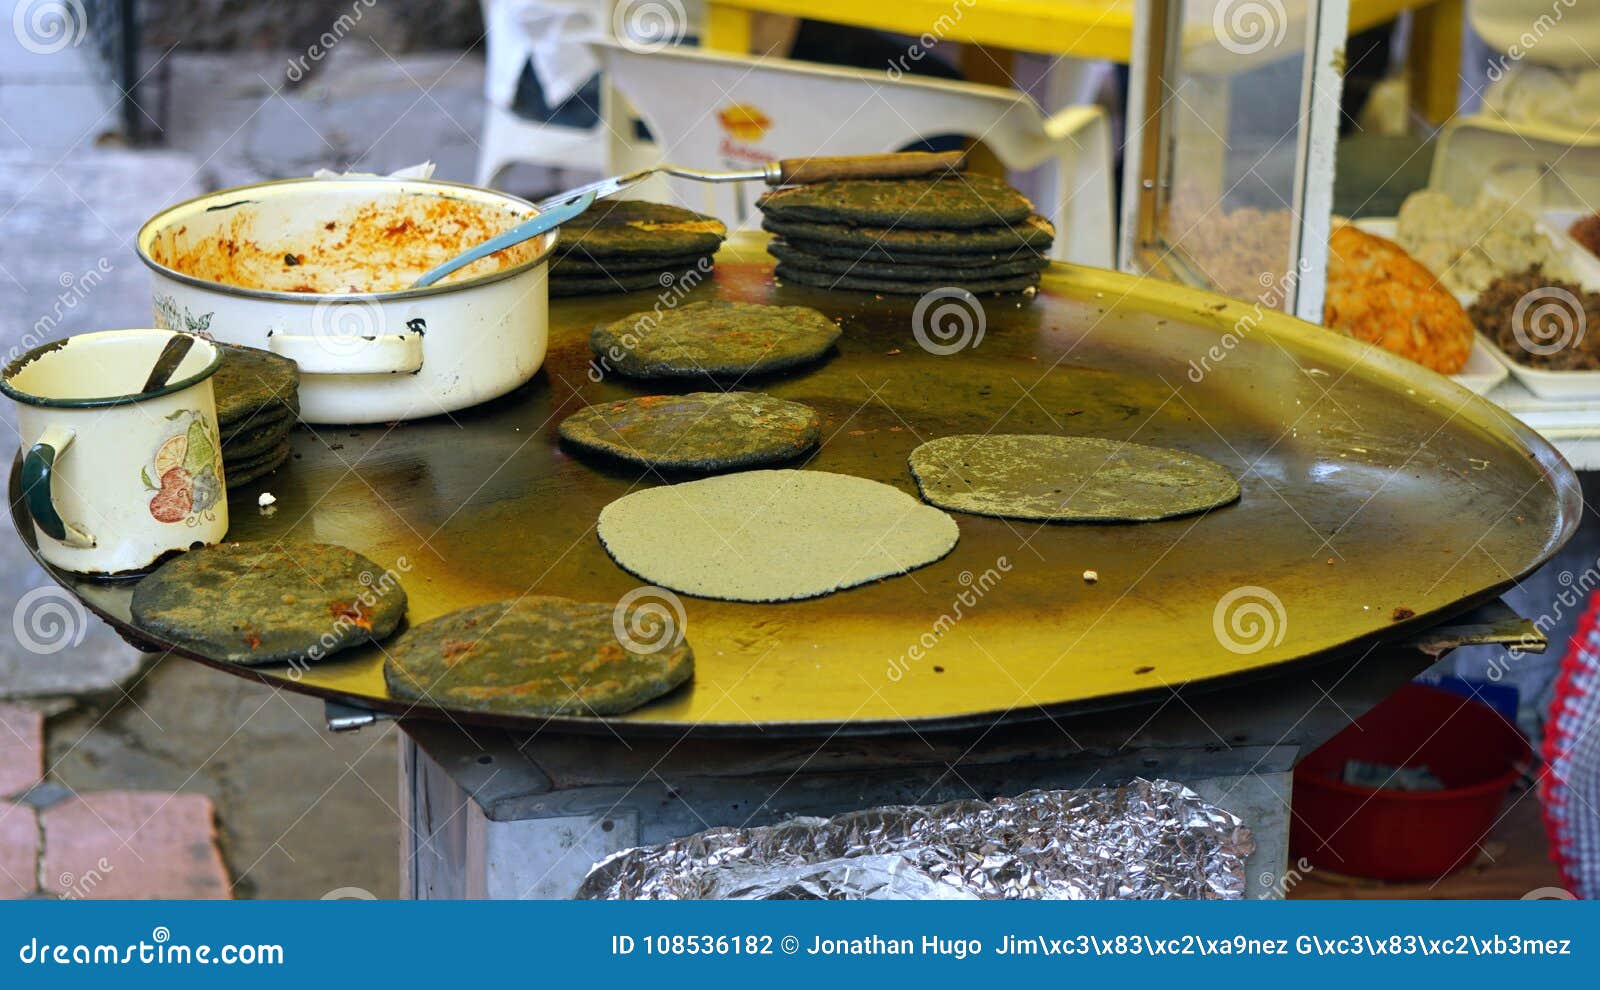 https://thumbs.dreamstime.com/z/big-mexican-comal-food-mexican-cooking-metallic-tray-used-to-cook-traditional-gorditas-mexican-traditional-food-made-108536182.jpg